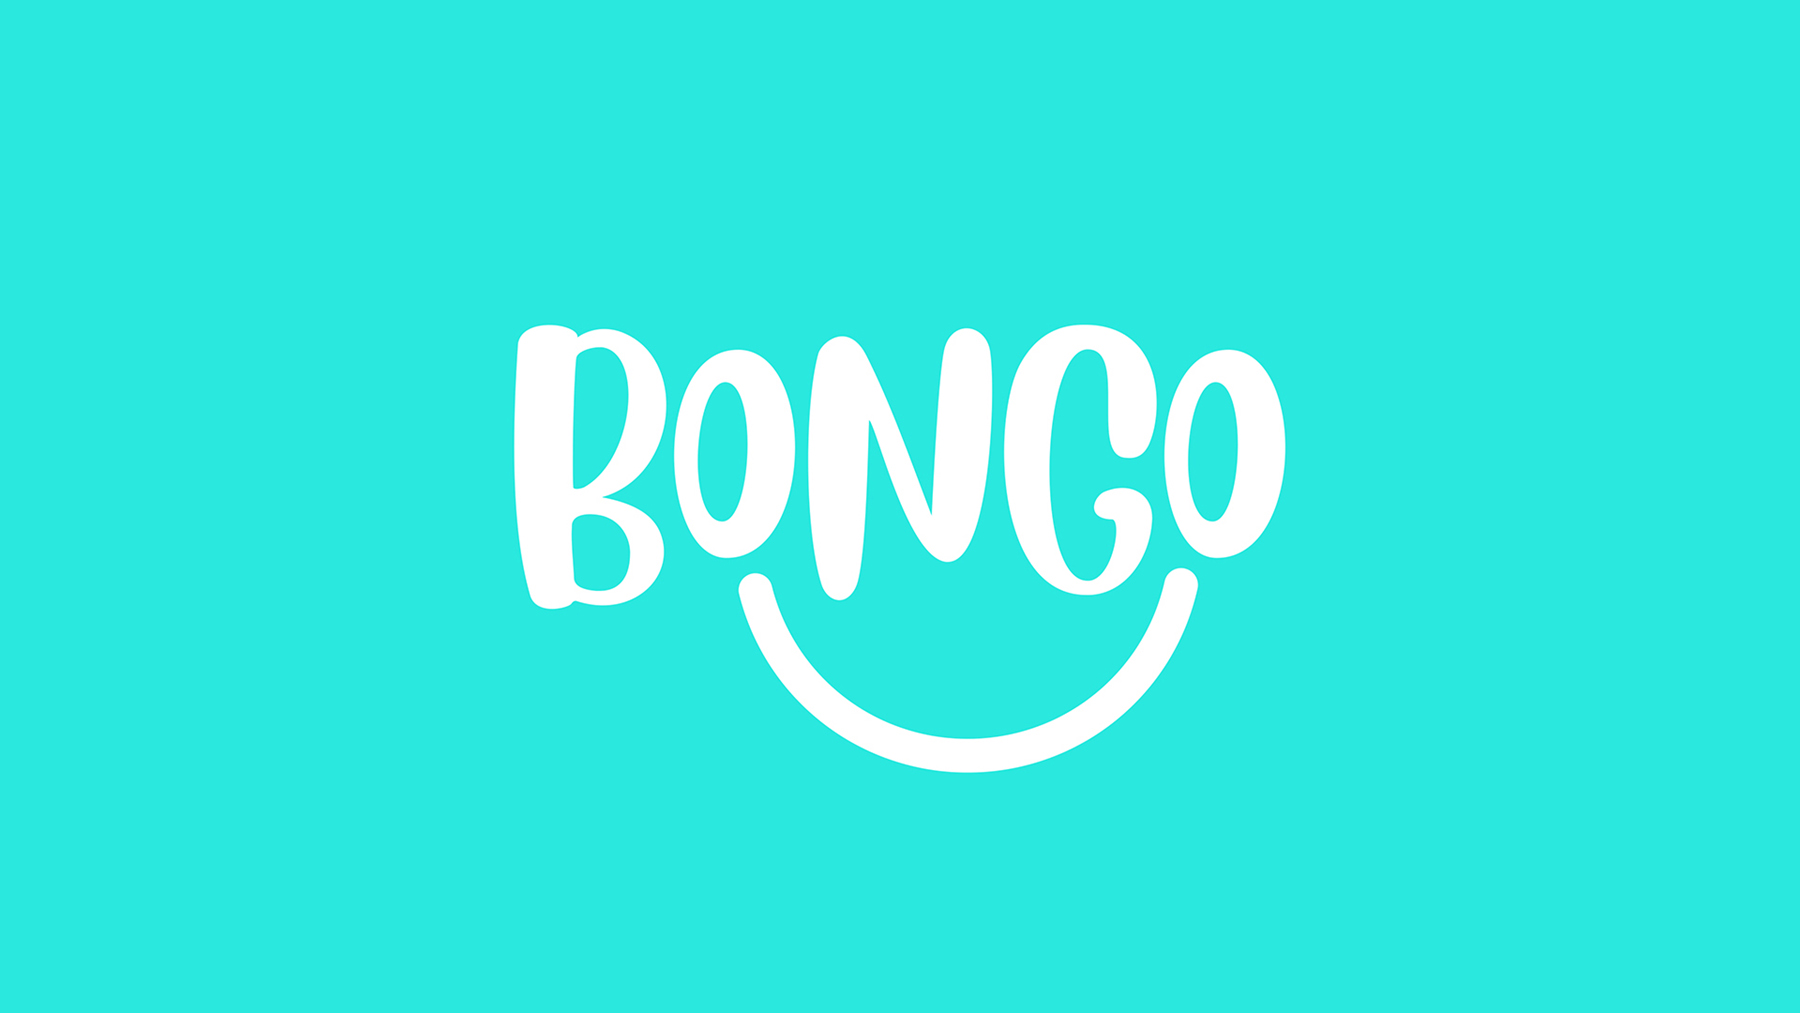 Bongo Parties' final brand design over a solid teal background.